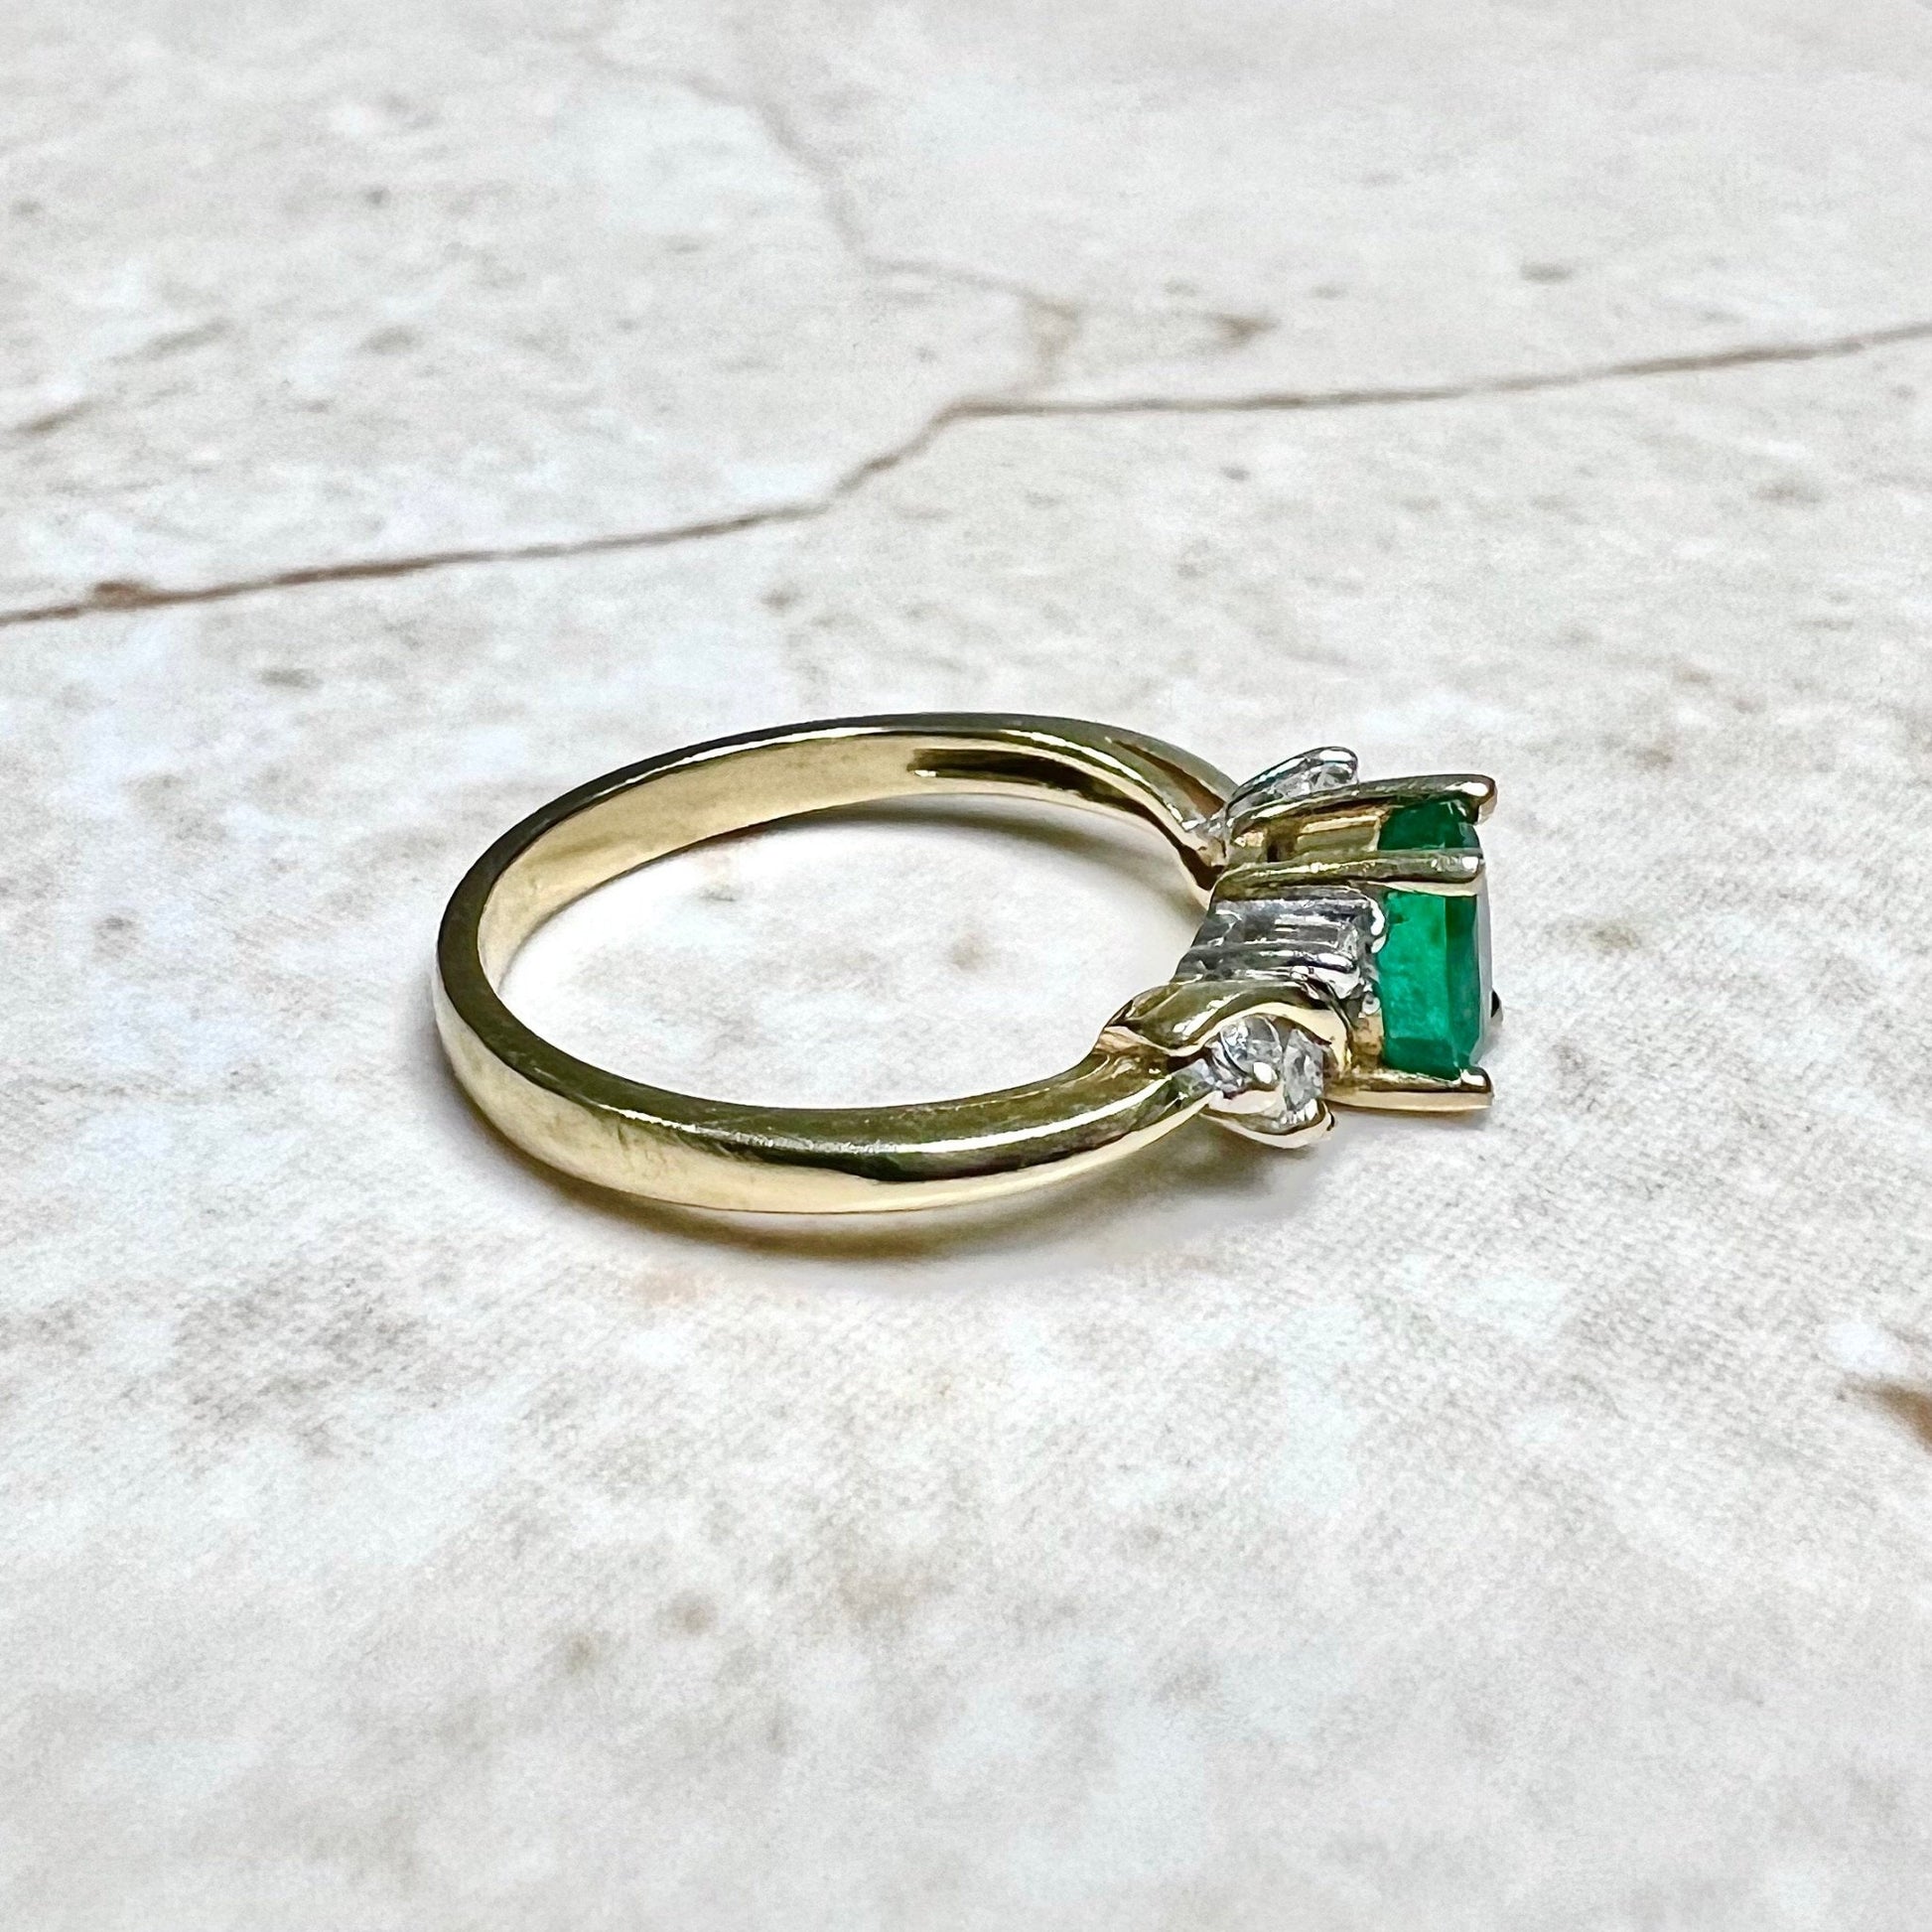 Vintage 14K Natural Emerald Ring - Yellow Gold Diamond & Emerald Solitaire Ring - Cocktail Ring - Engagement Ring - May Birthstone Ring